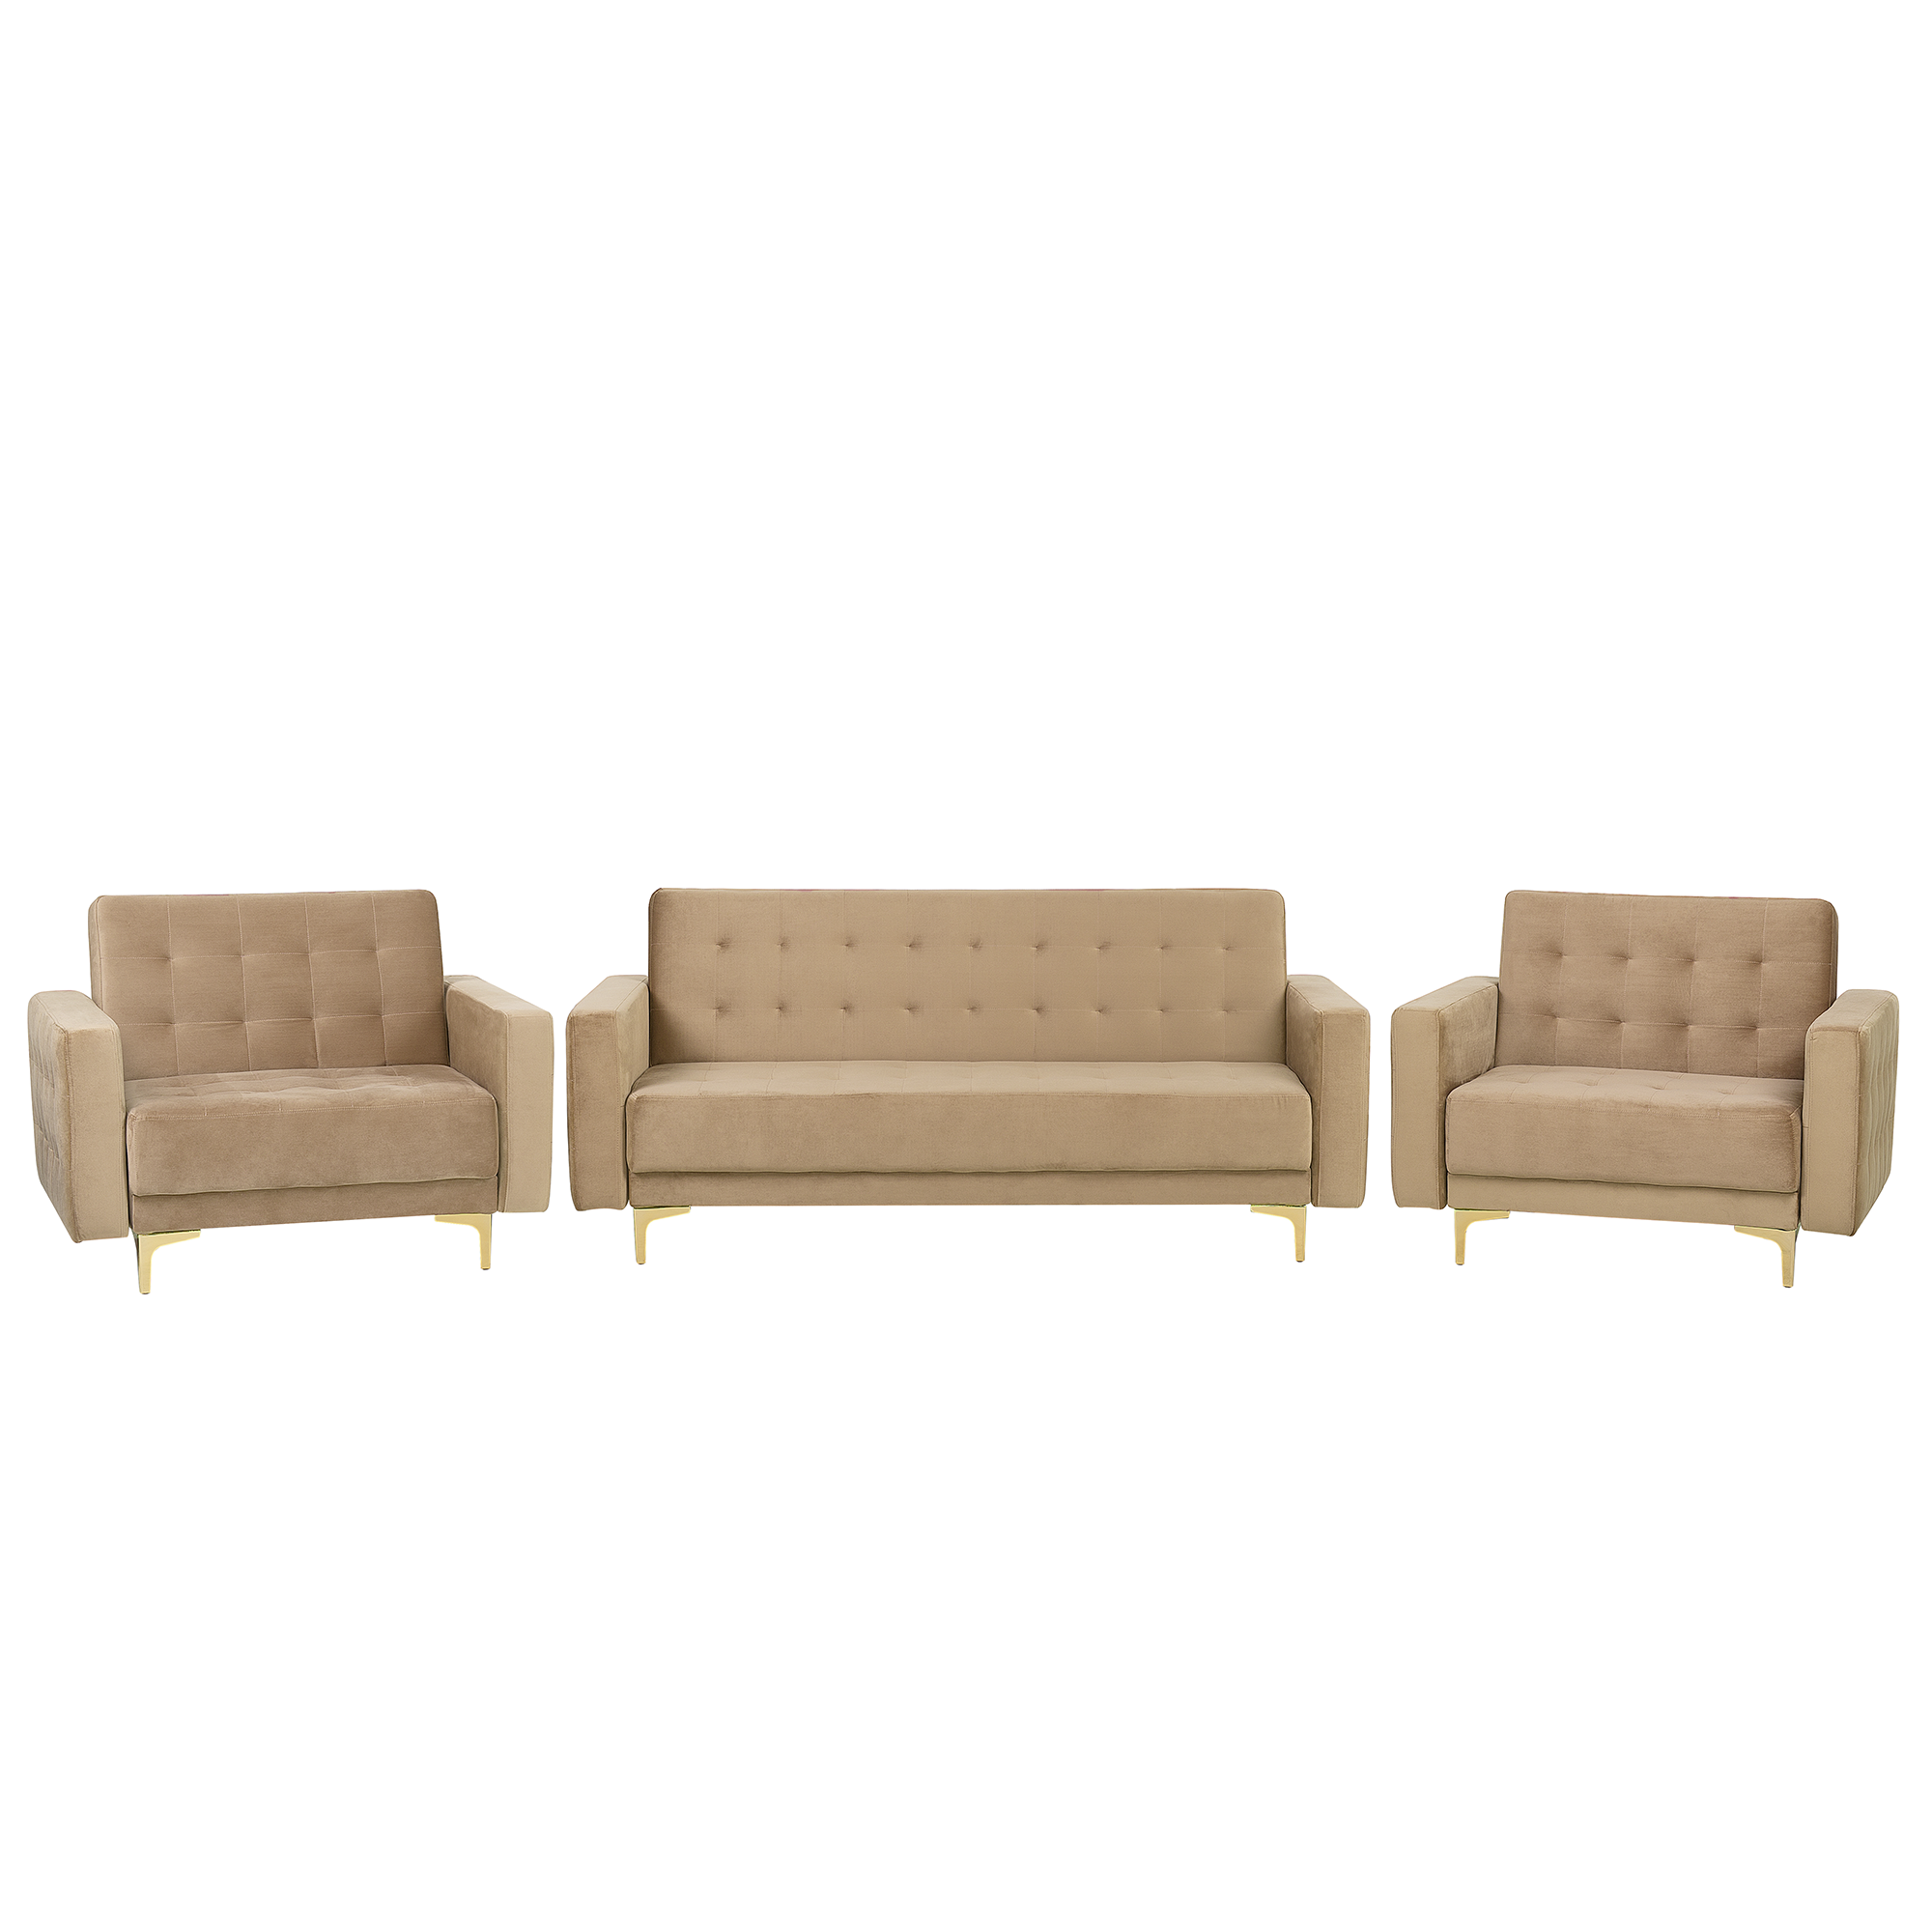 Beliani Living Room Set Grey Velvet Tufted Fabric 3 Seater Sofa Bed 2 Reclining Armchairs Modern 3-Piece Suite